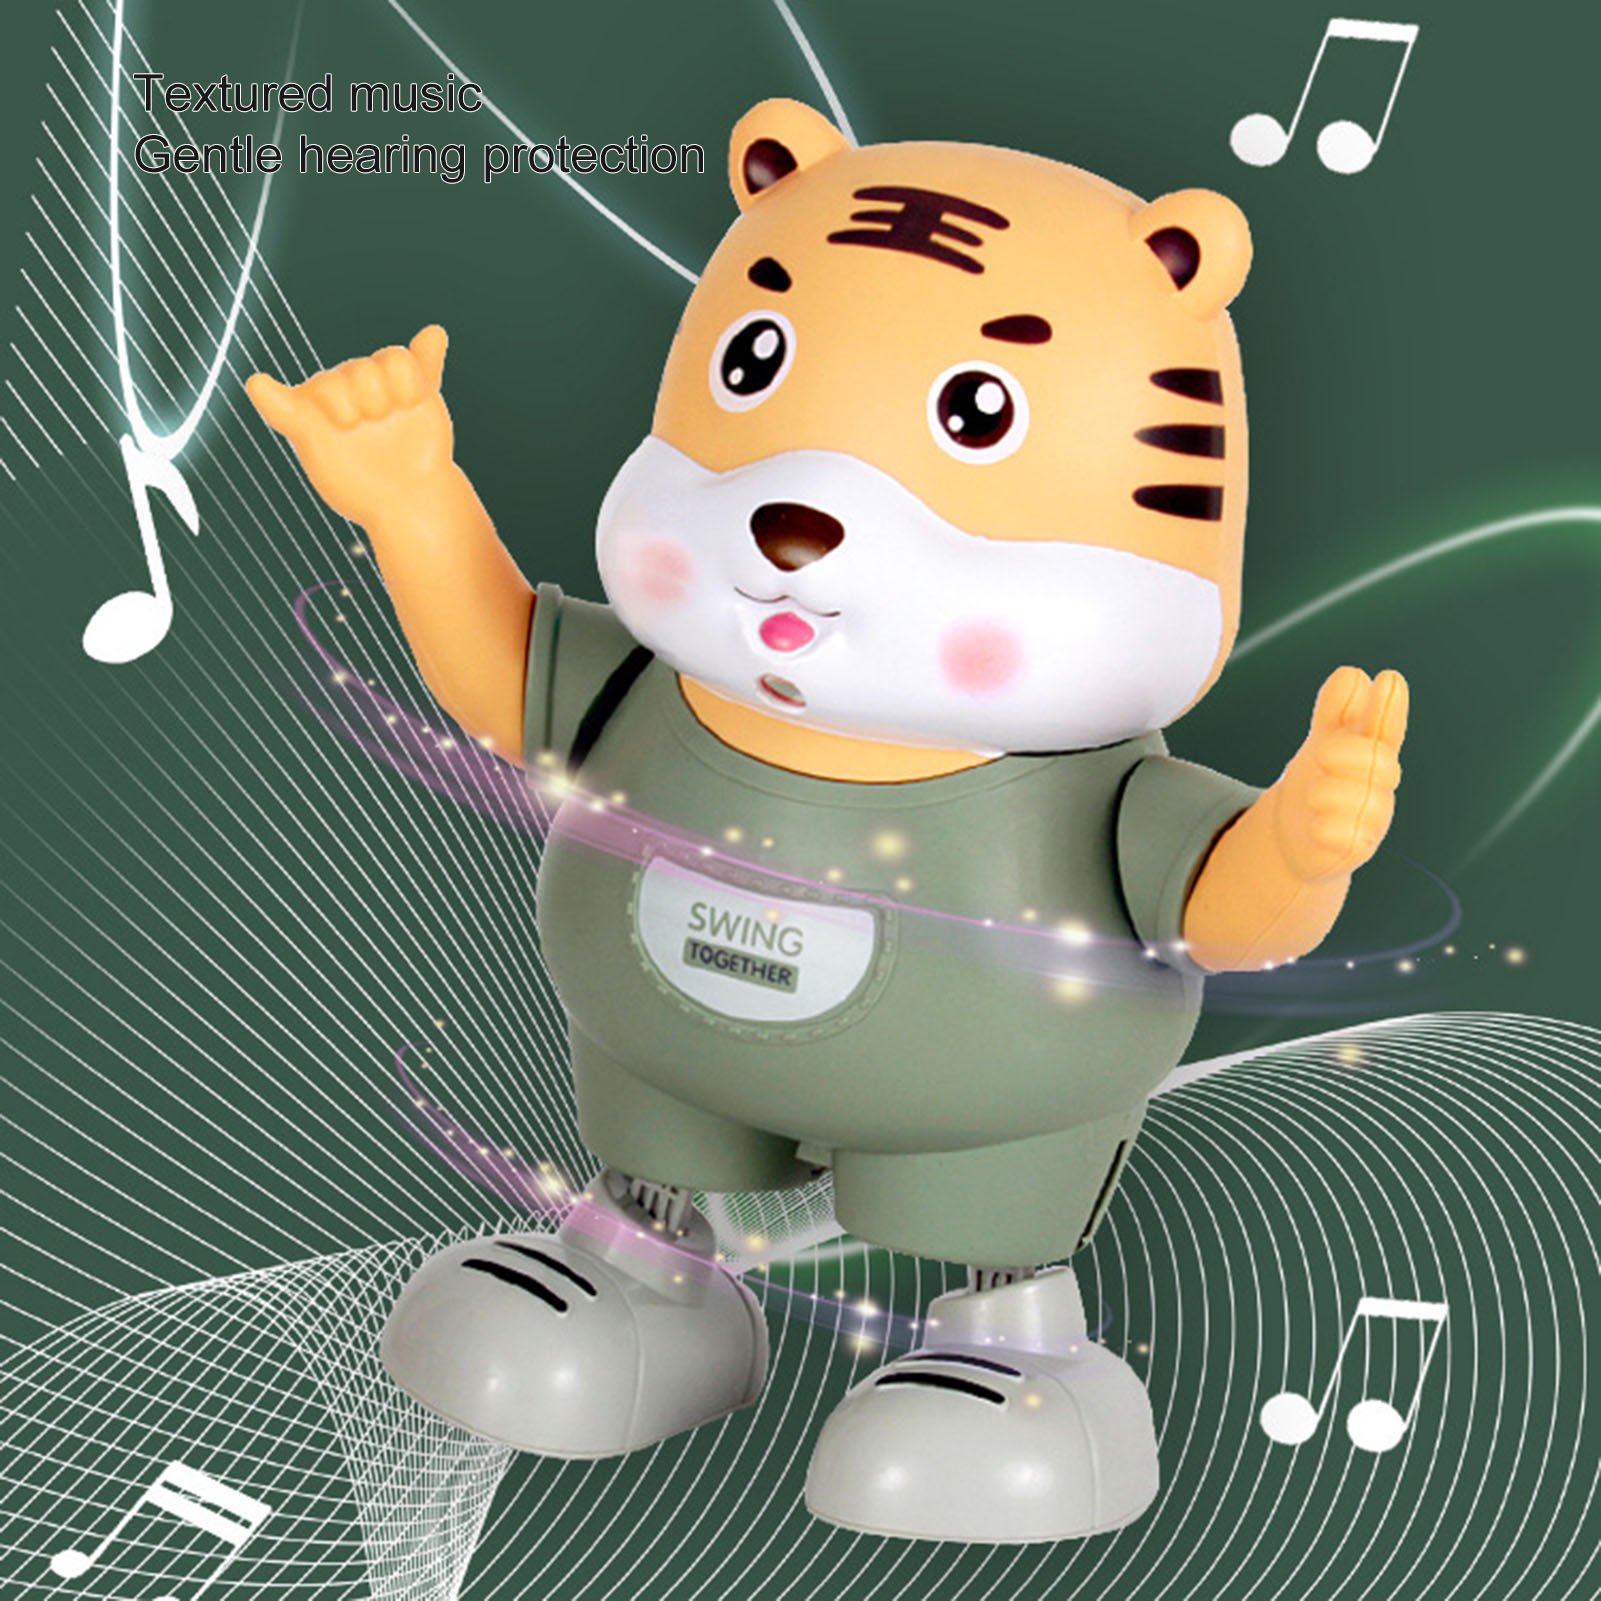 Fun Dancing Tiger Toy Electric Lovely Appearance Lightweight Children Dancing Tiger Music Lighting Projection Toys for Kids.